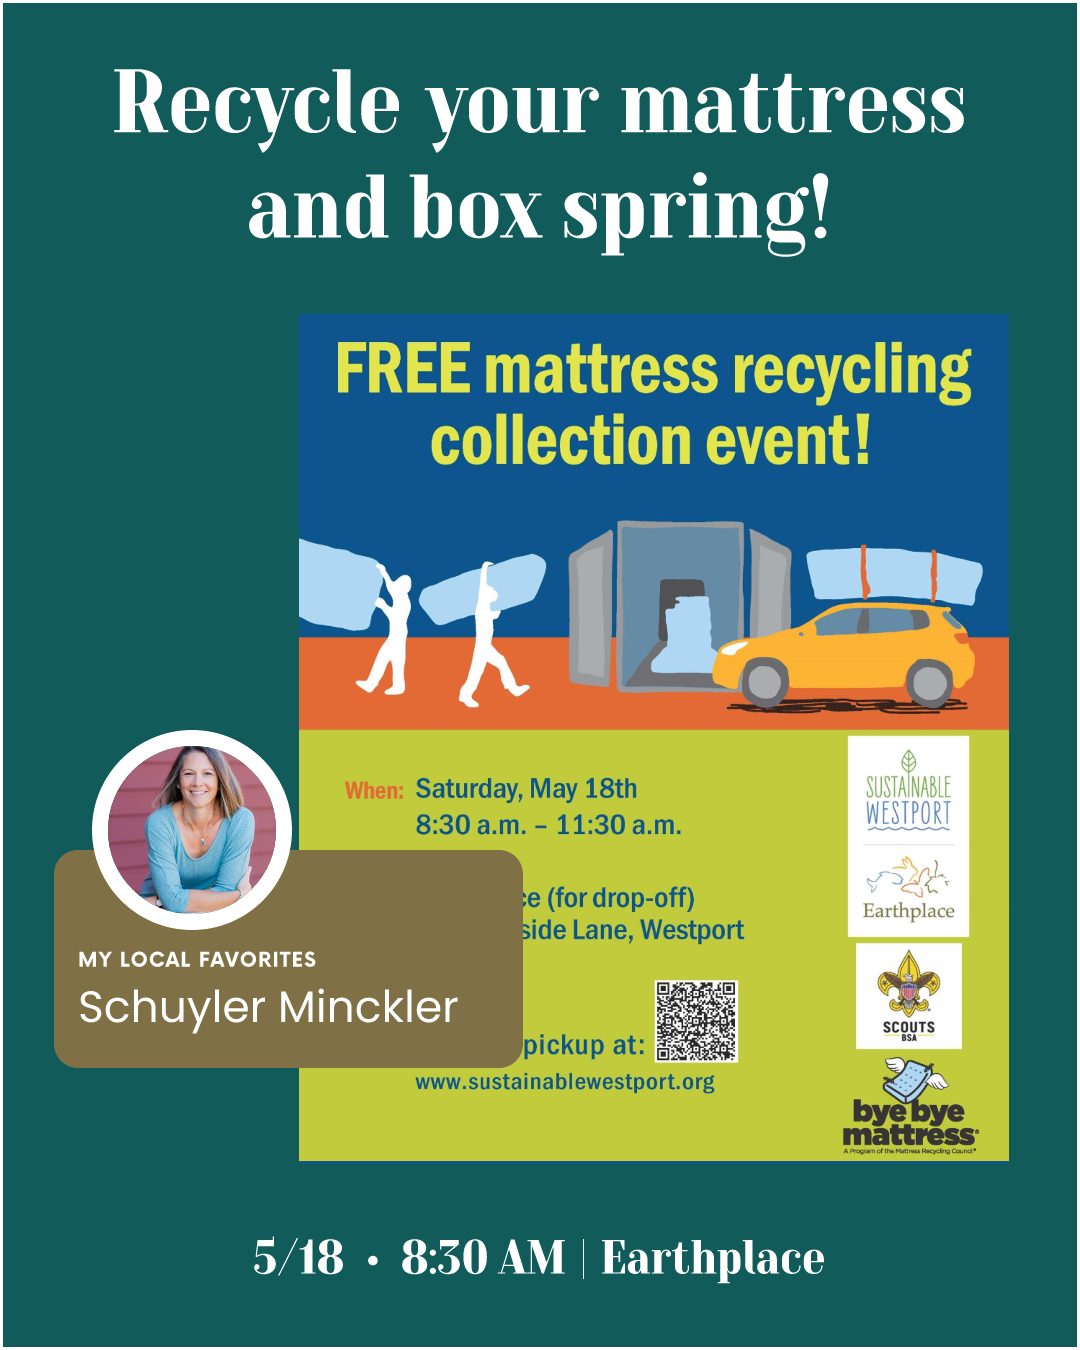 Recycle your mattress and box spring!